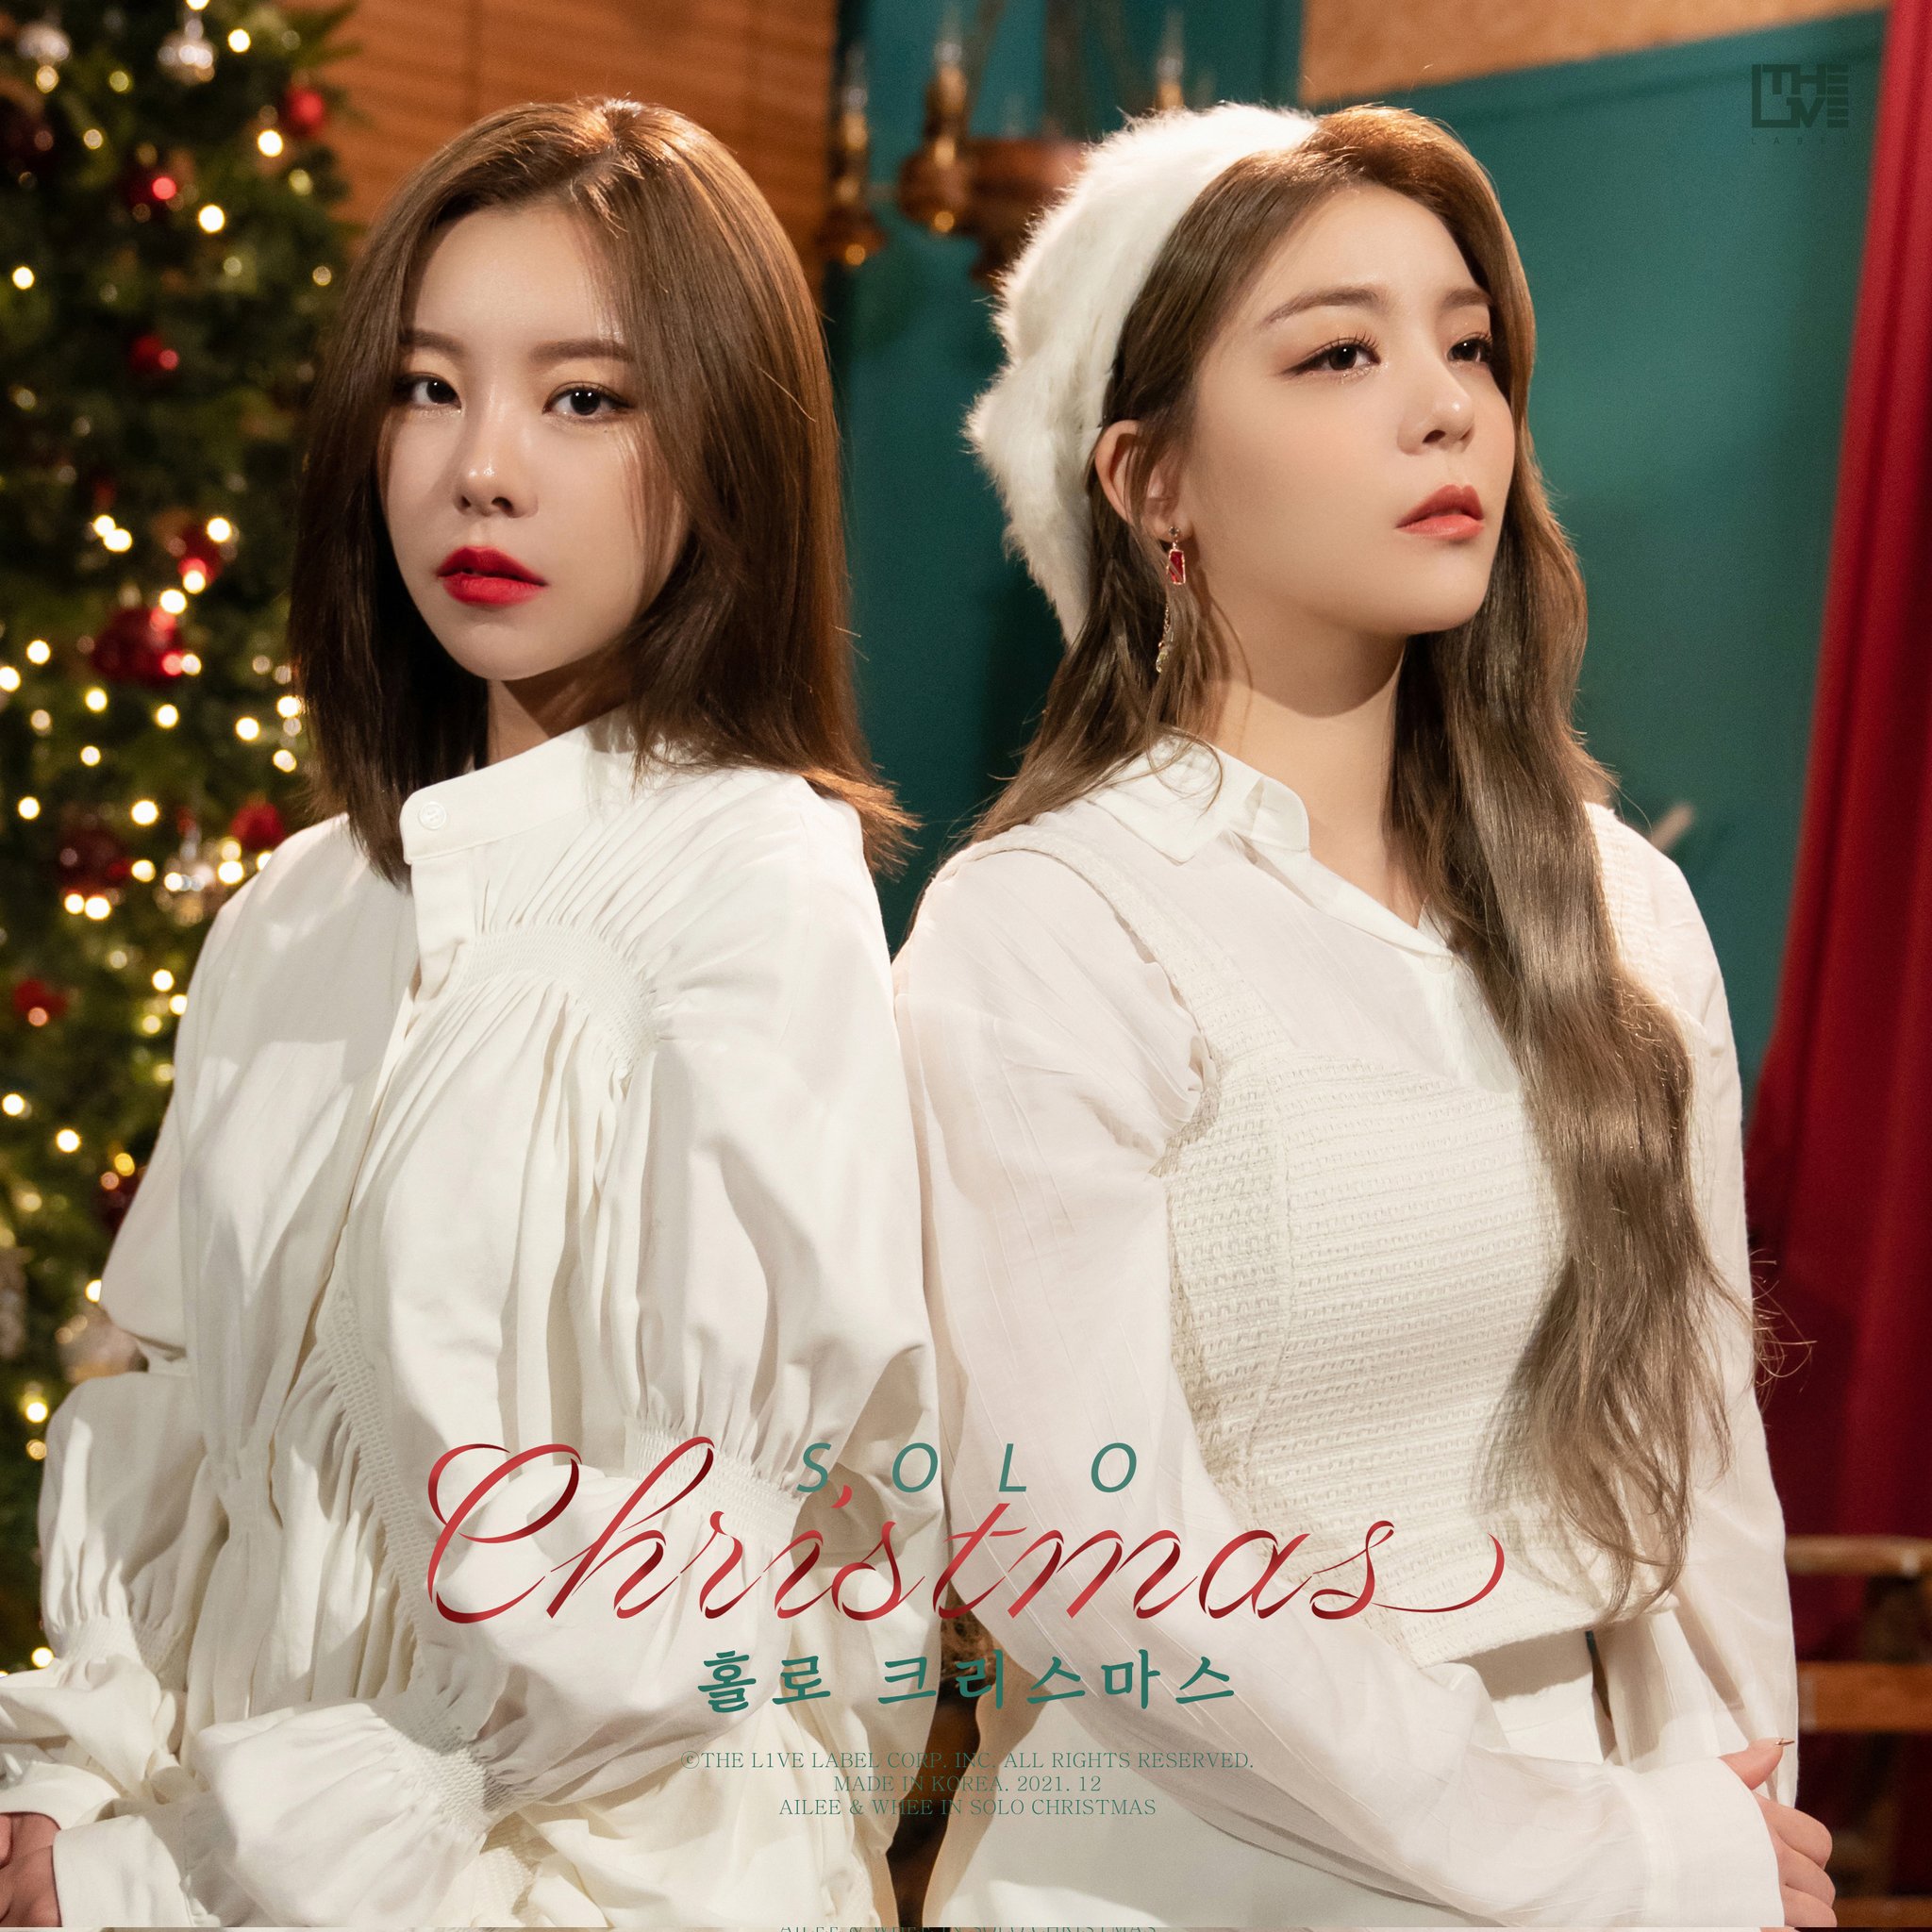 Ailee x Whee In - 'Solo Christmas' Photo